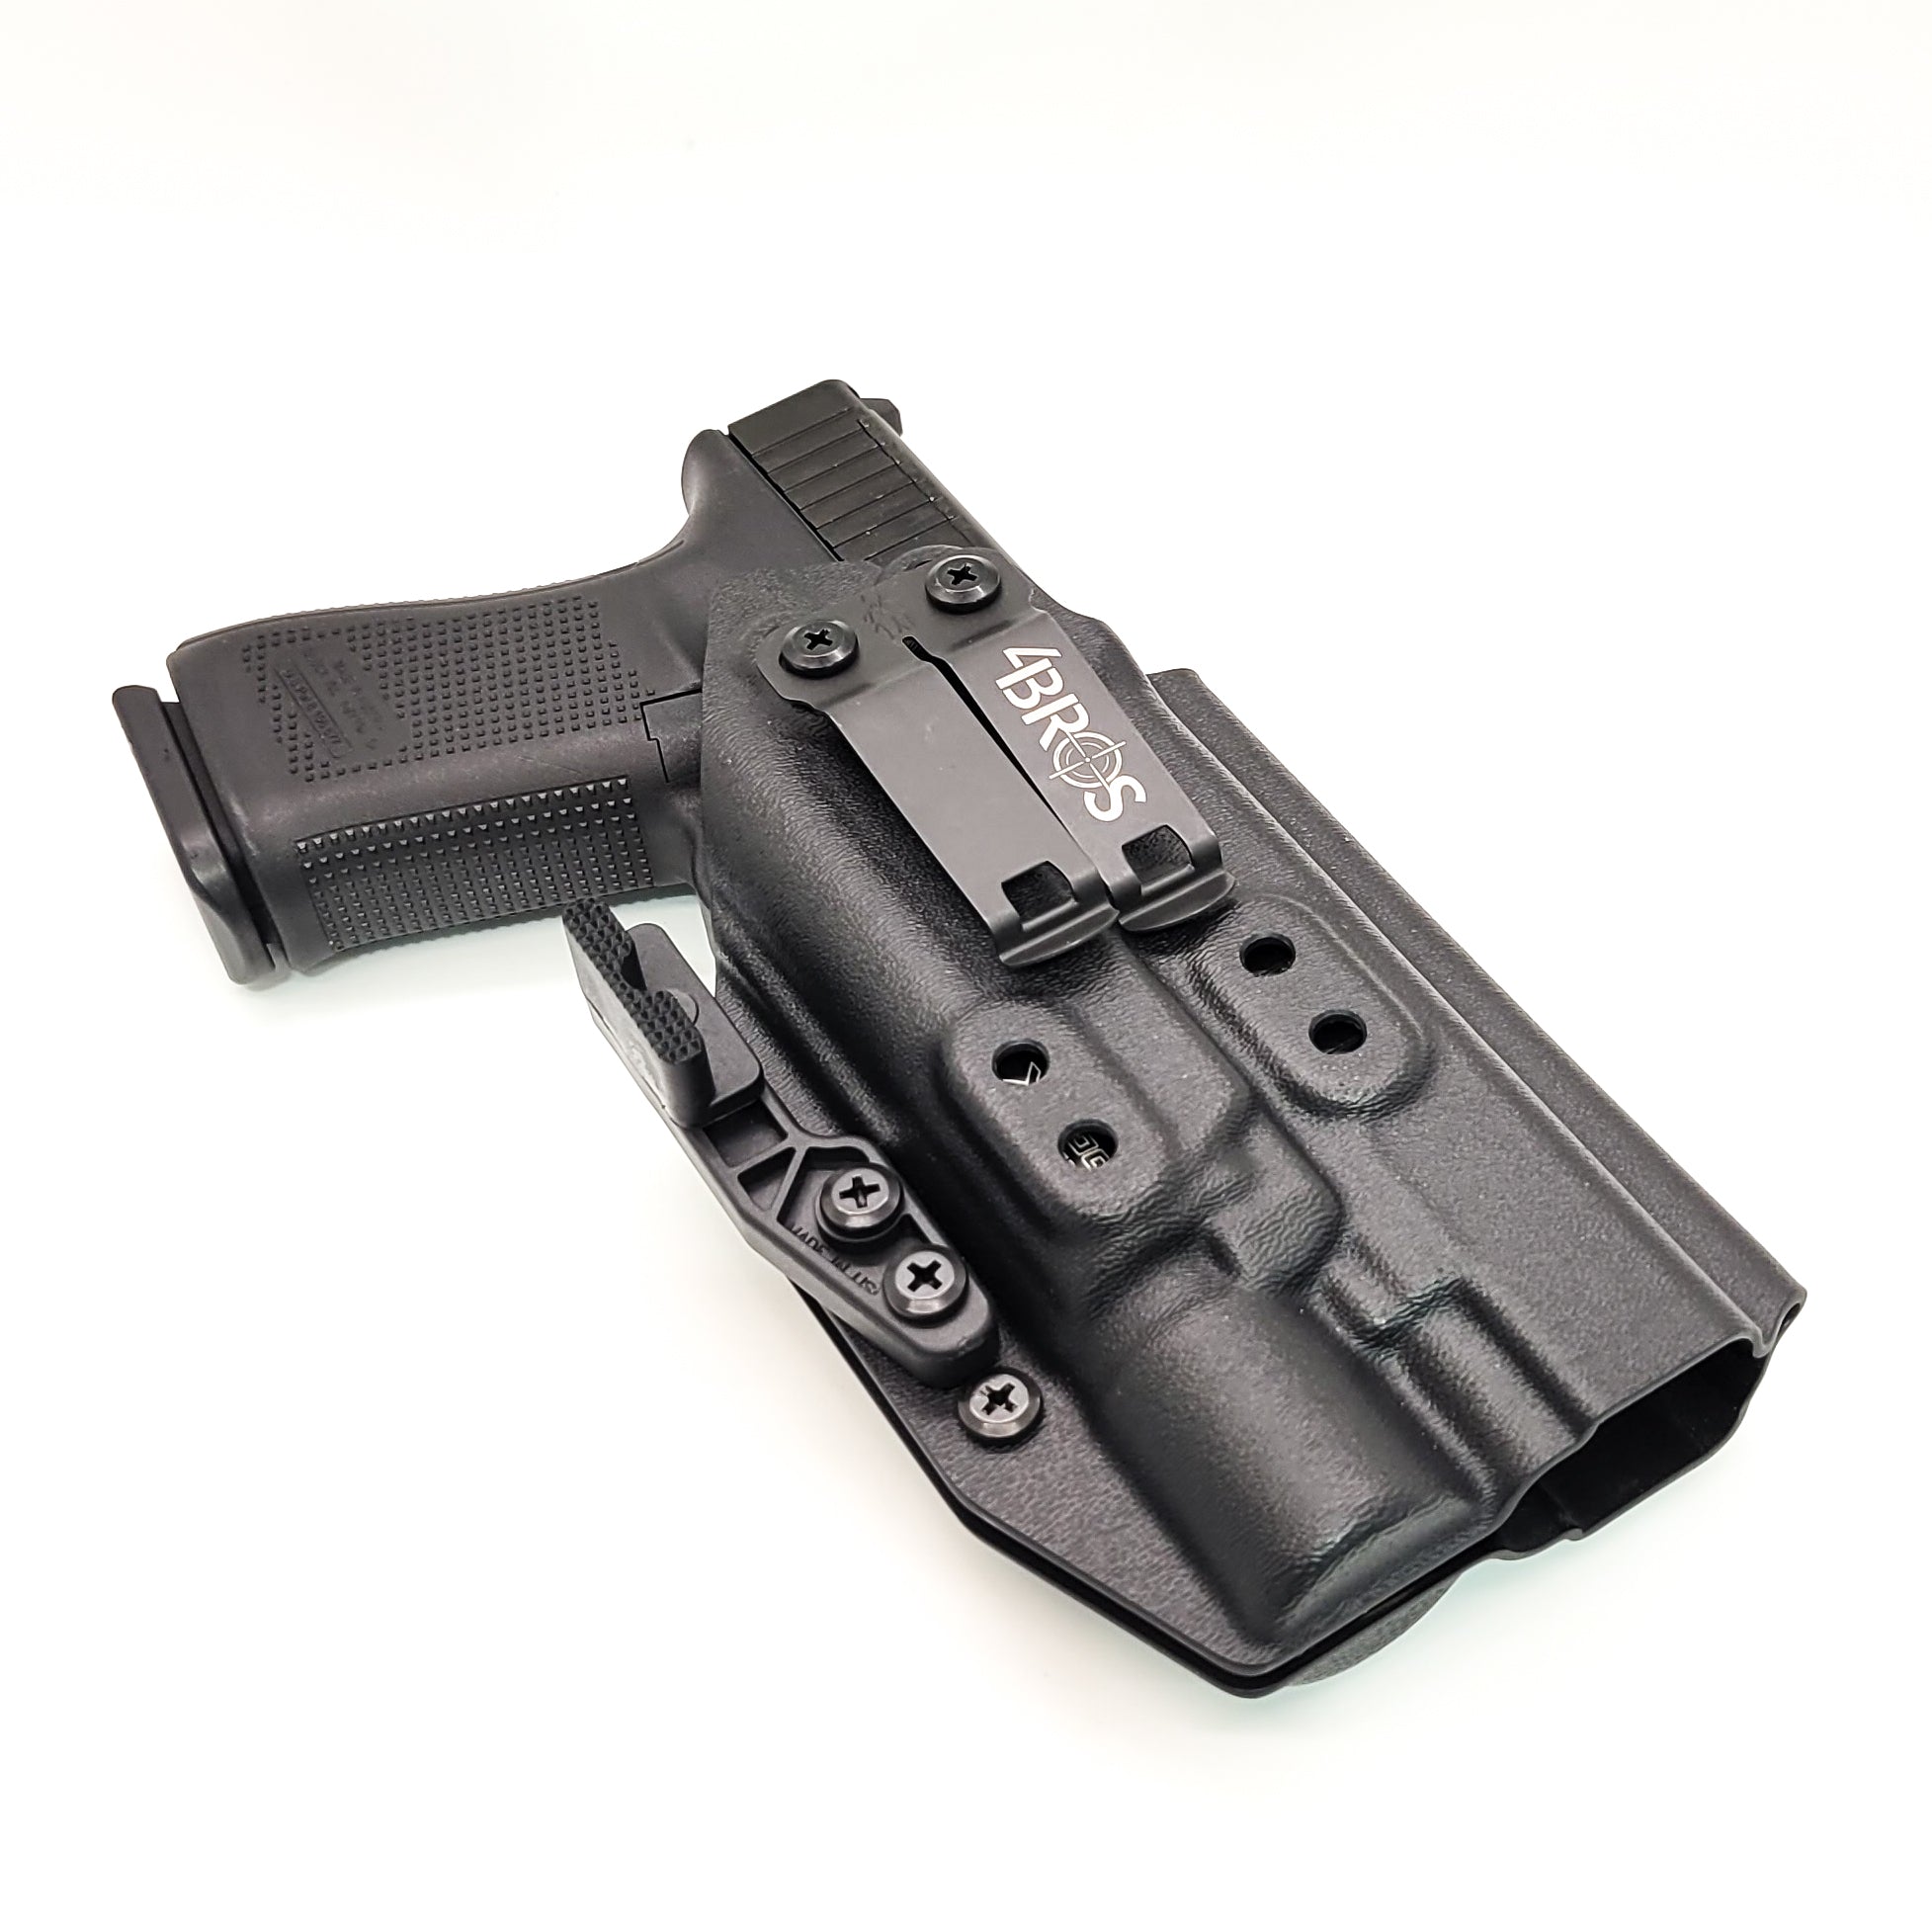 For the best, IWB AIWB Inside Waistband Taco Style Holster designed to fit the Glock 34, 17, and 19 Gen 5 with the Surefire X300U A or B X300U-A or X300U-B weapon-mounted light, shop Four Brothers Holsters. Adjustable retention and ride height, high sweat guard, minimum material for reduced printing. Made in the USA.